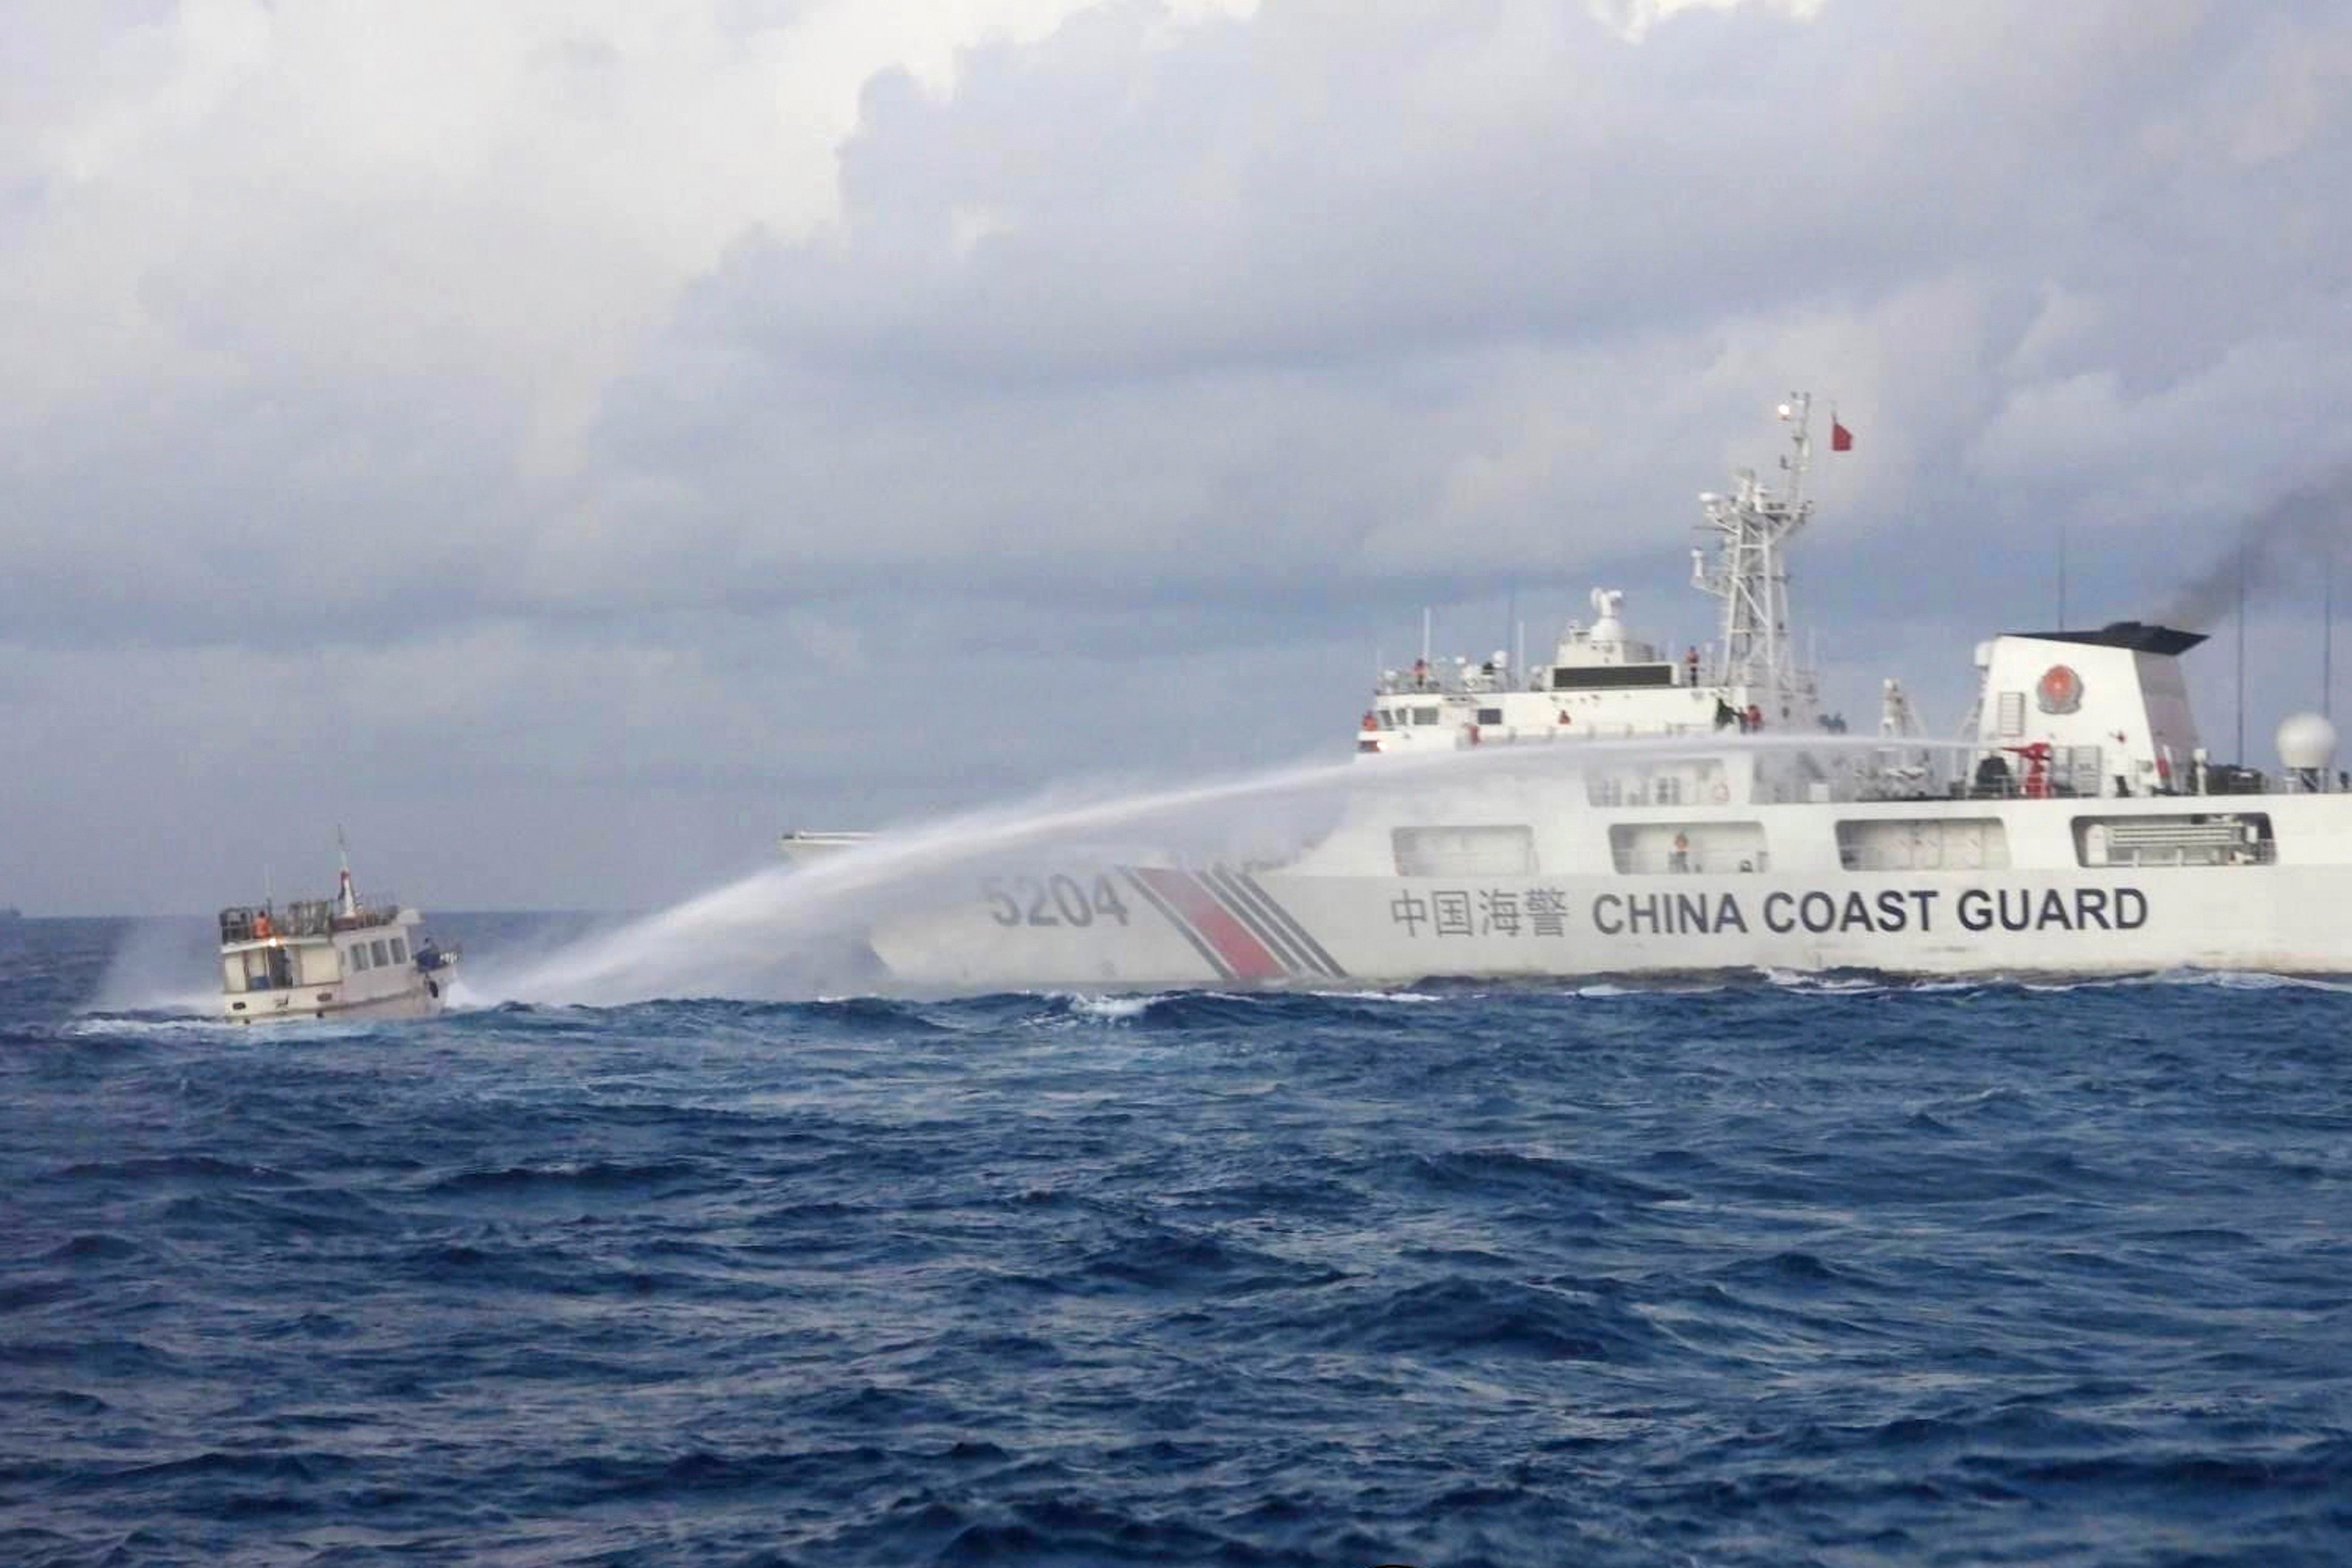 A Chinese Coast Guard ship uses water cannons on a Philippine navy-operated supply boat as it approaches Second Thomas Shoal, locally known as Ayungin Shoal, in the disputed South China Sea on December 10. Photo: Philippine Coast Guard via AP